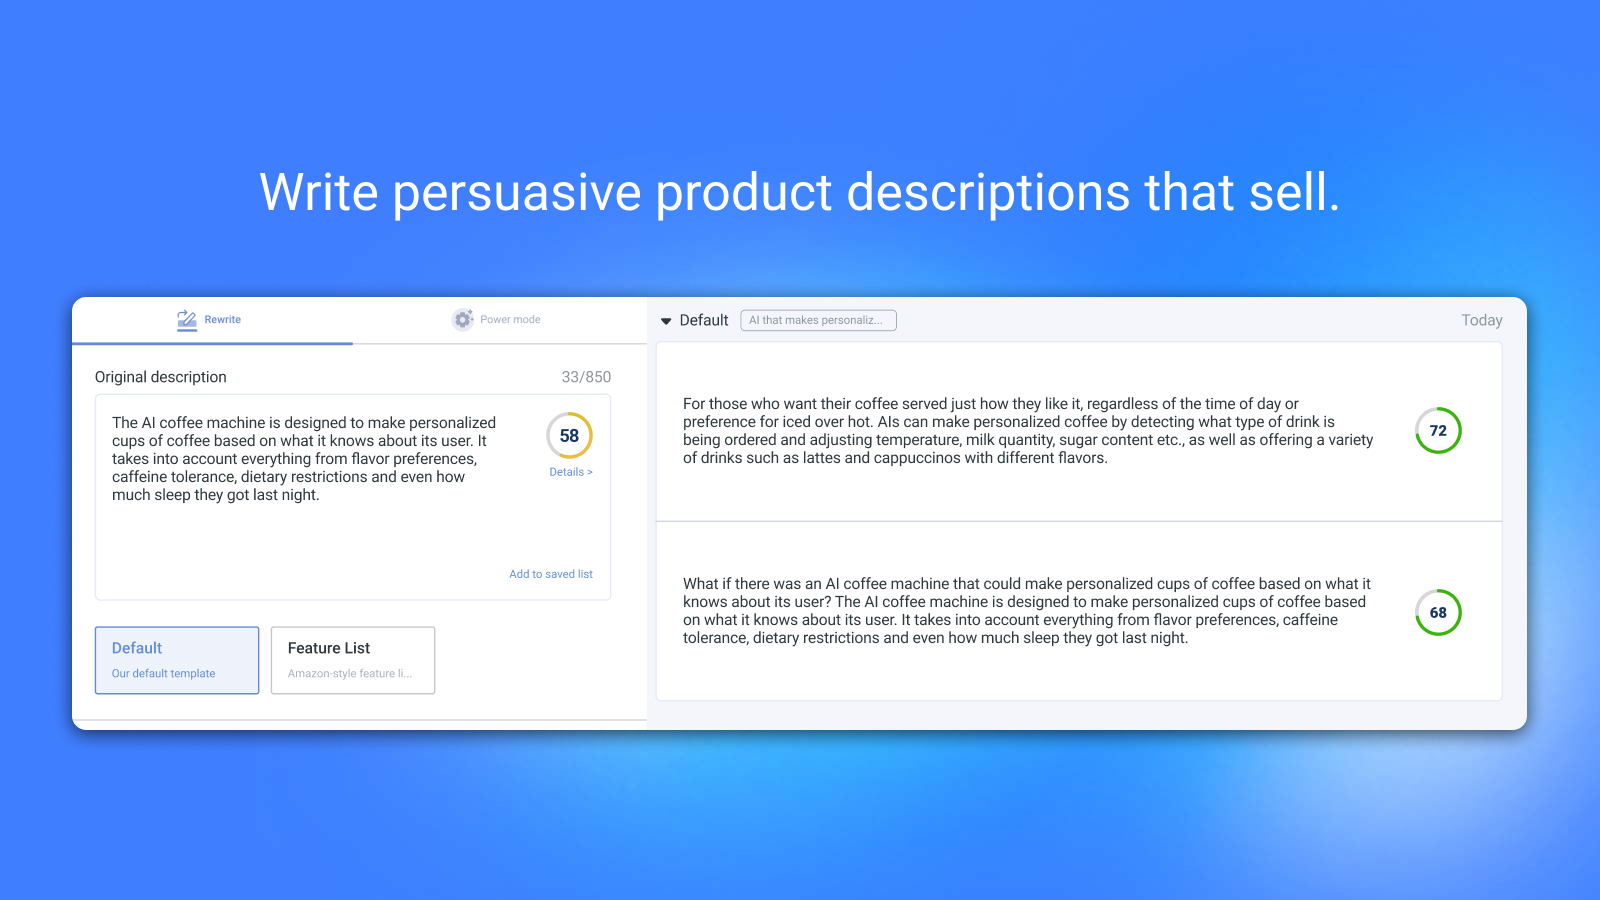 Write persuasive product descriptions that sell.